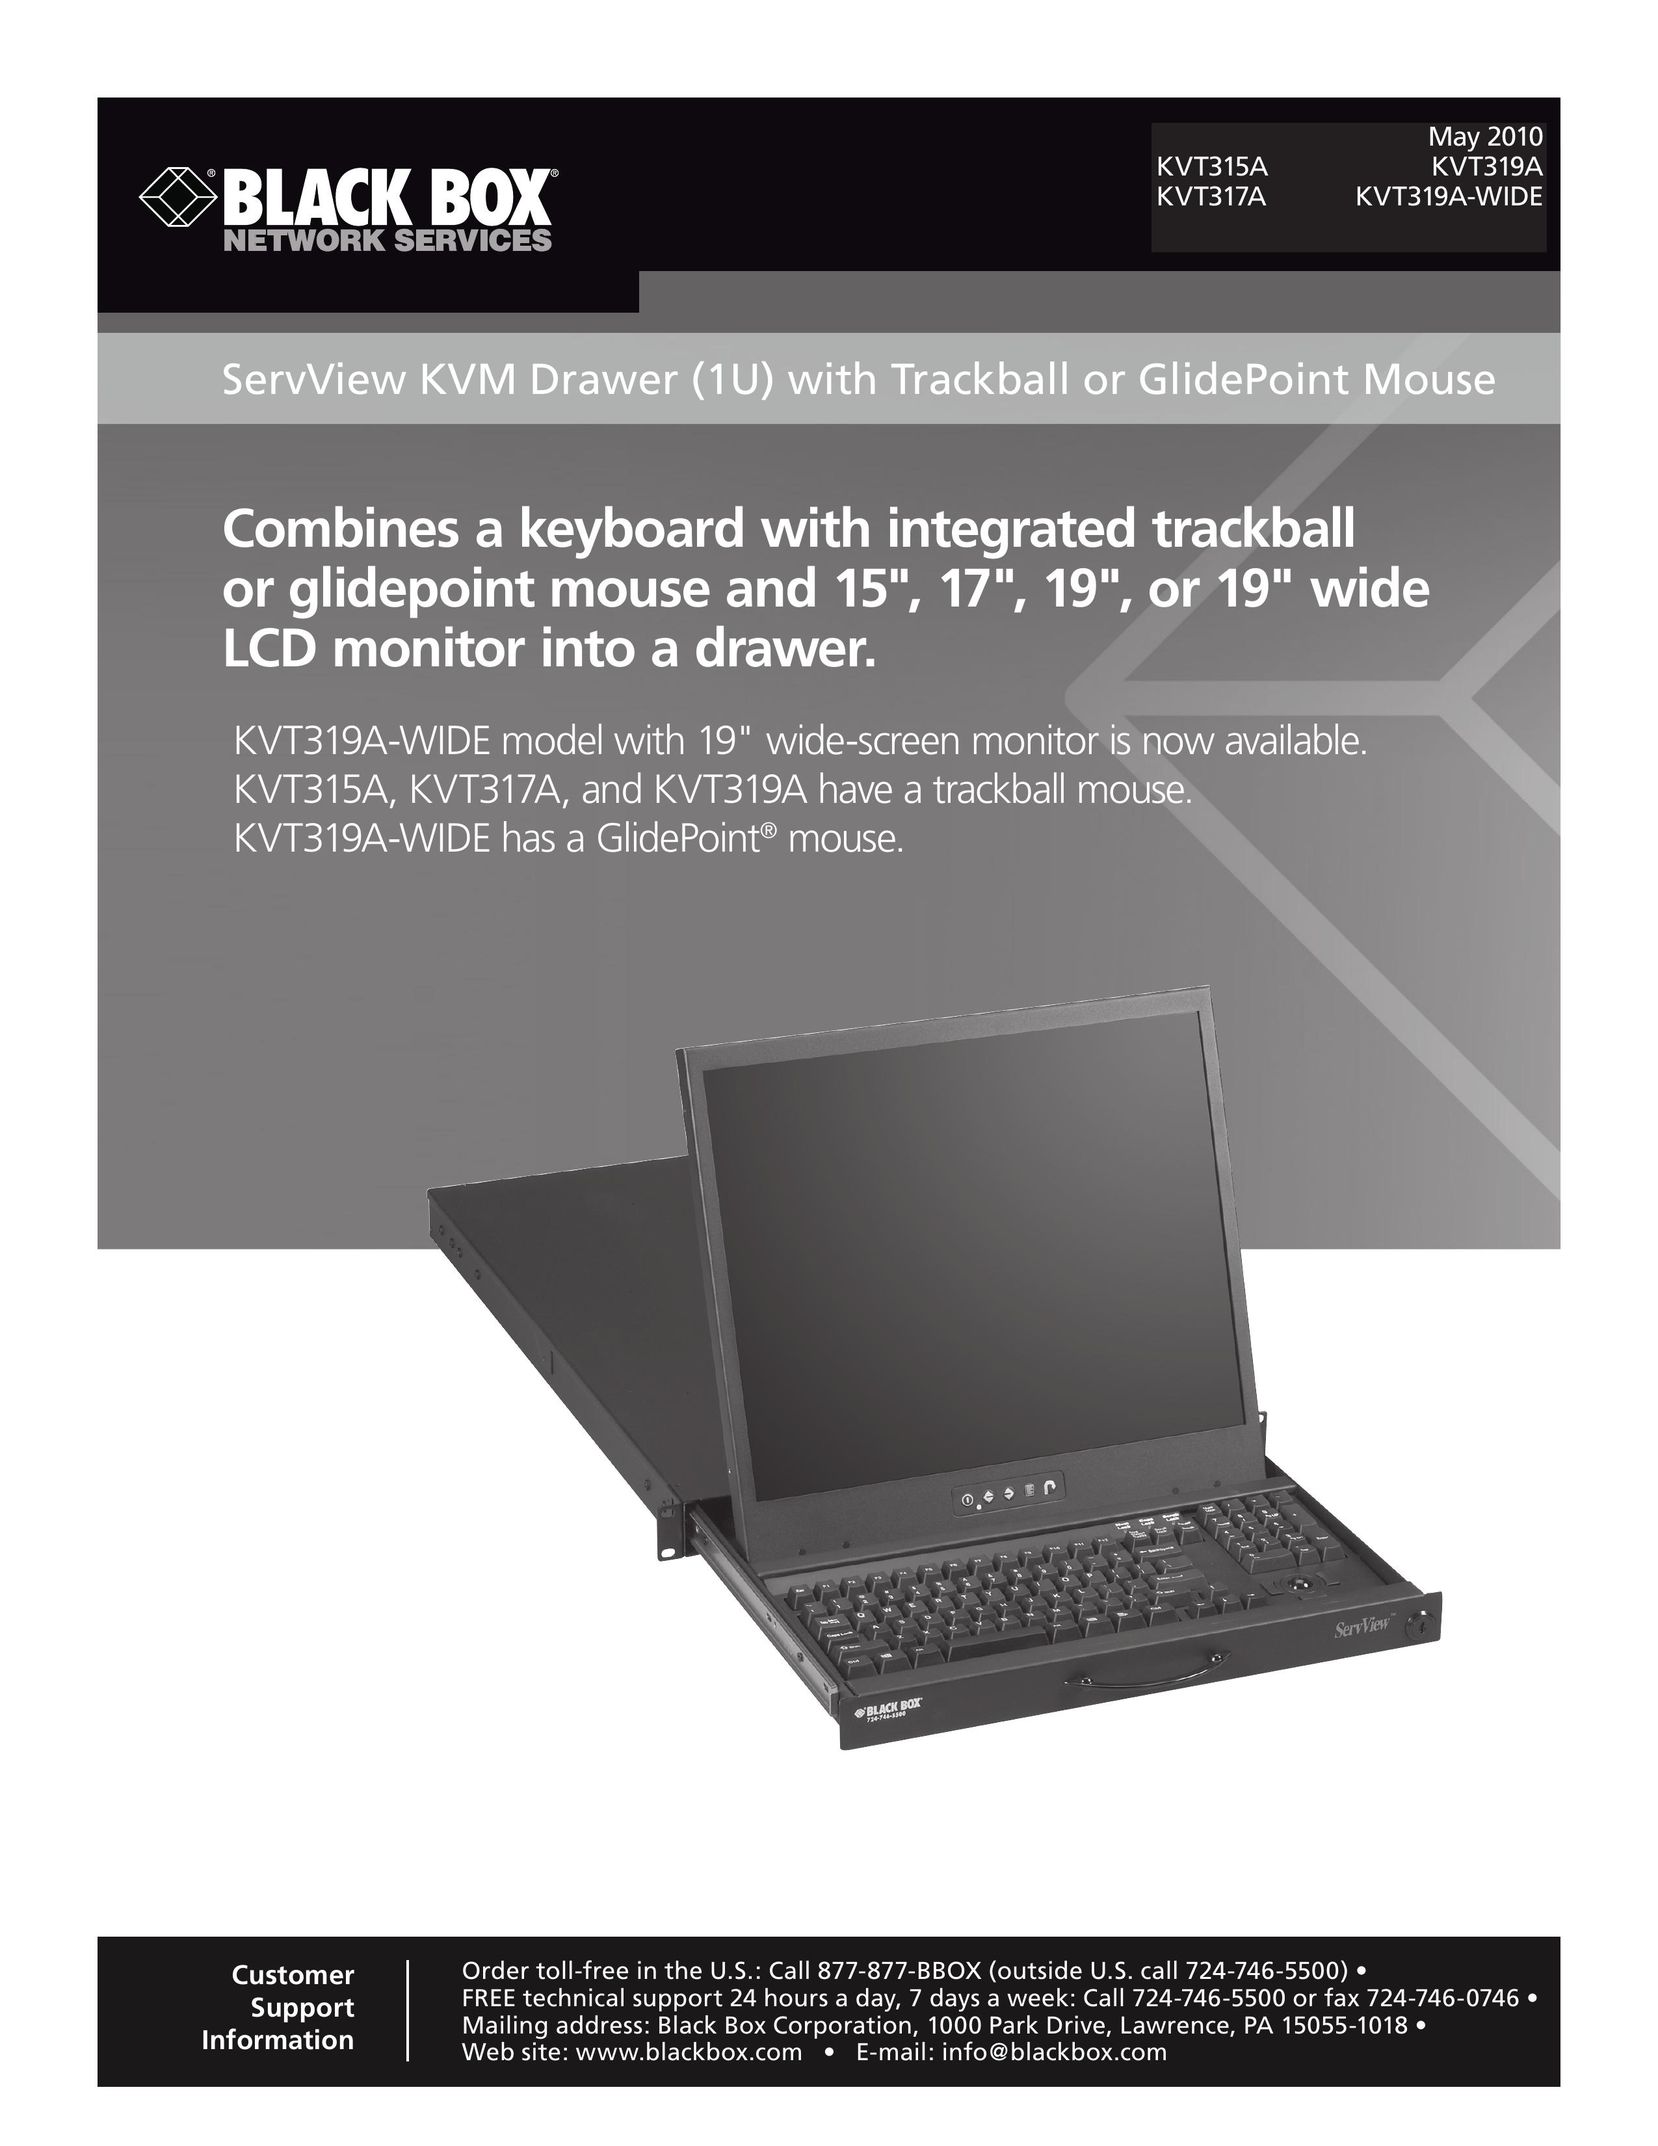 Black Box ServView KVM Drawer (1U) with Trackball or GlidePoint Mouse Personal Computer User Manual